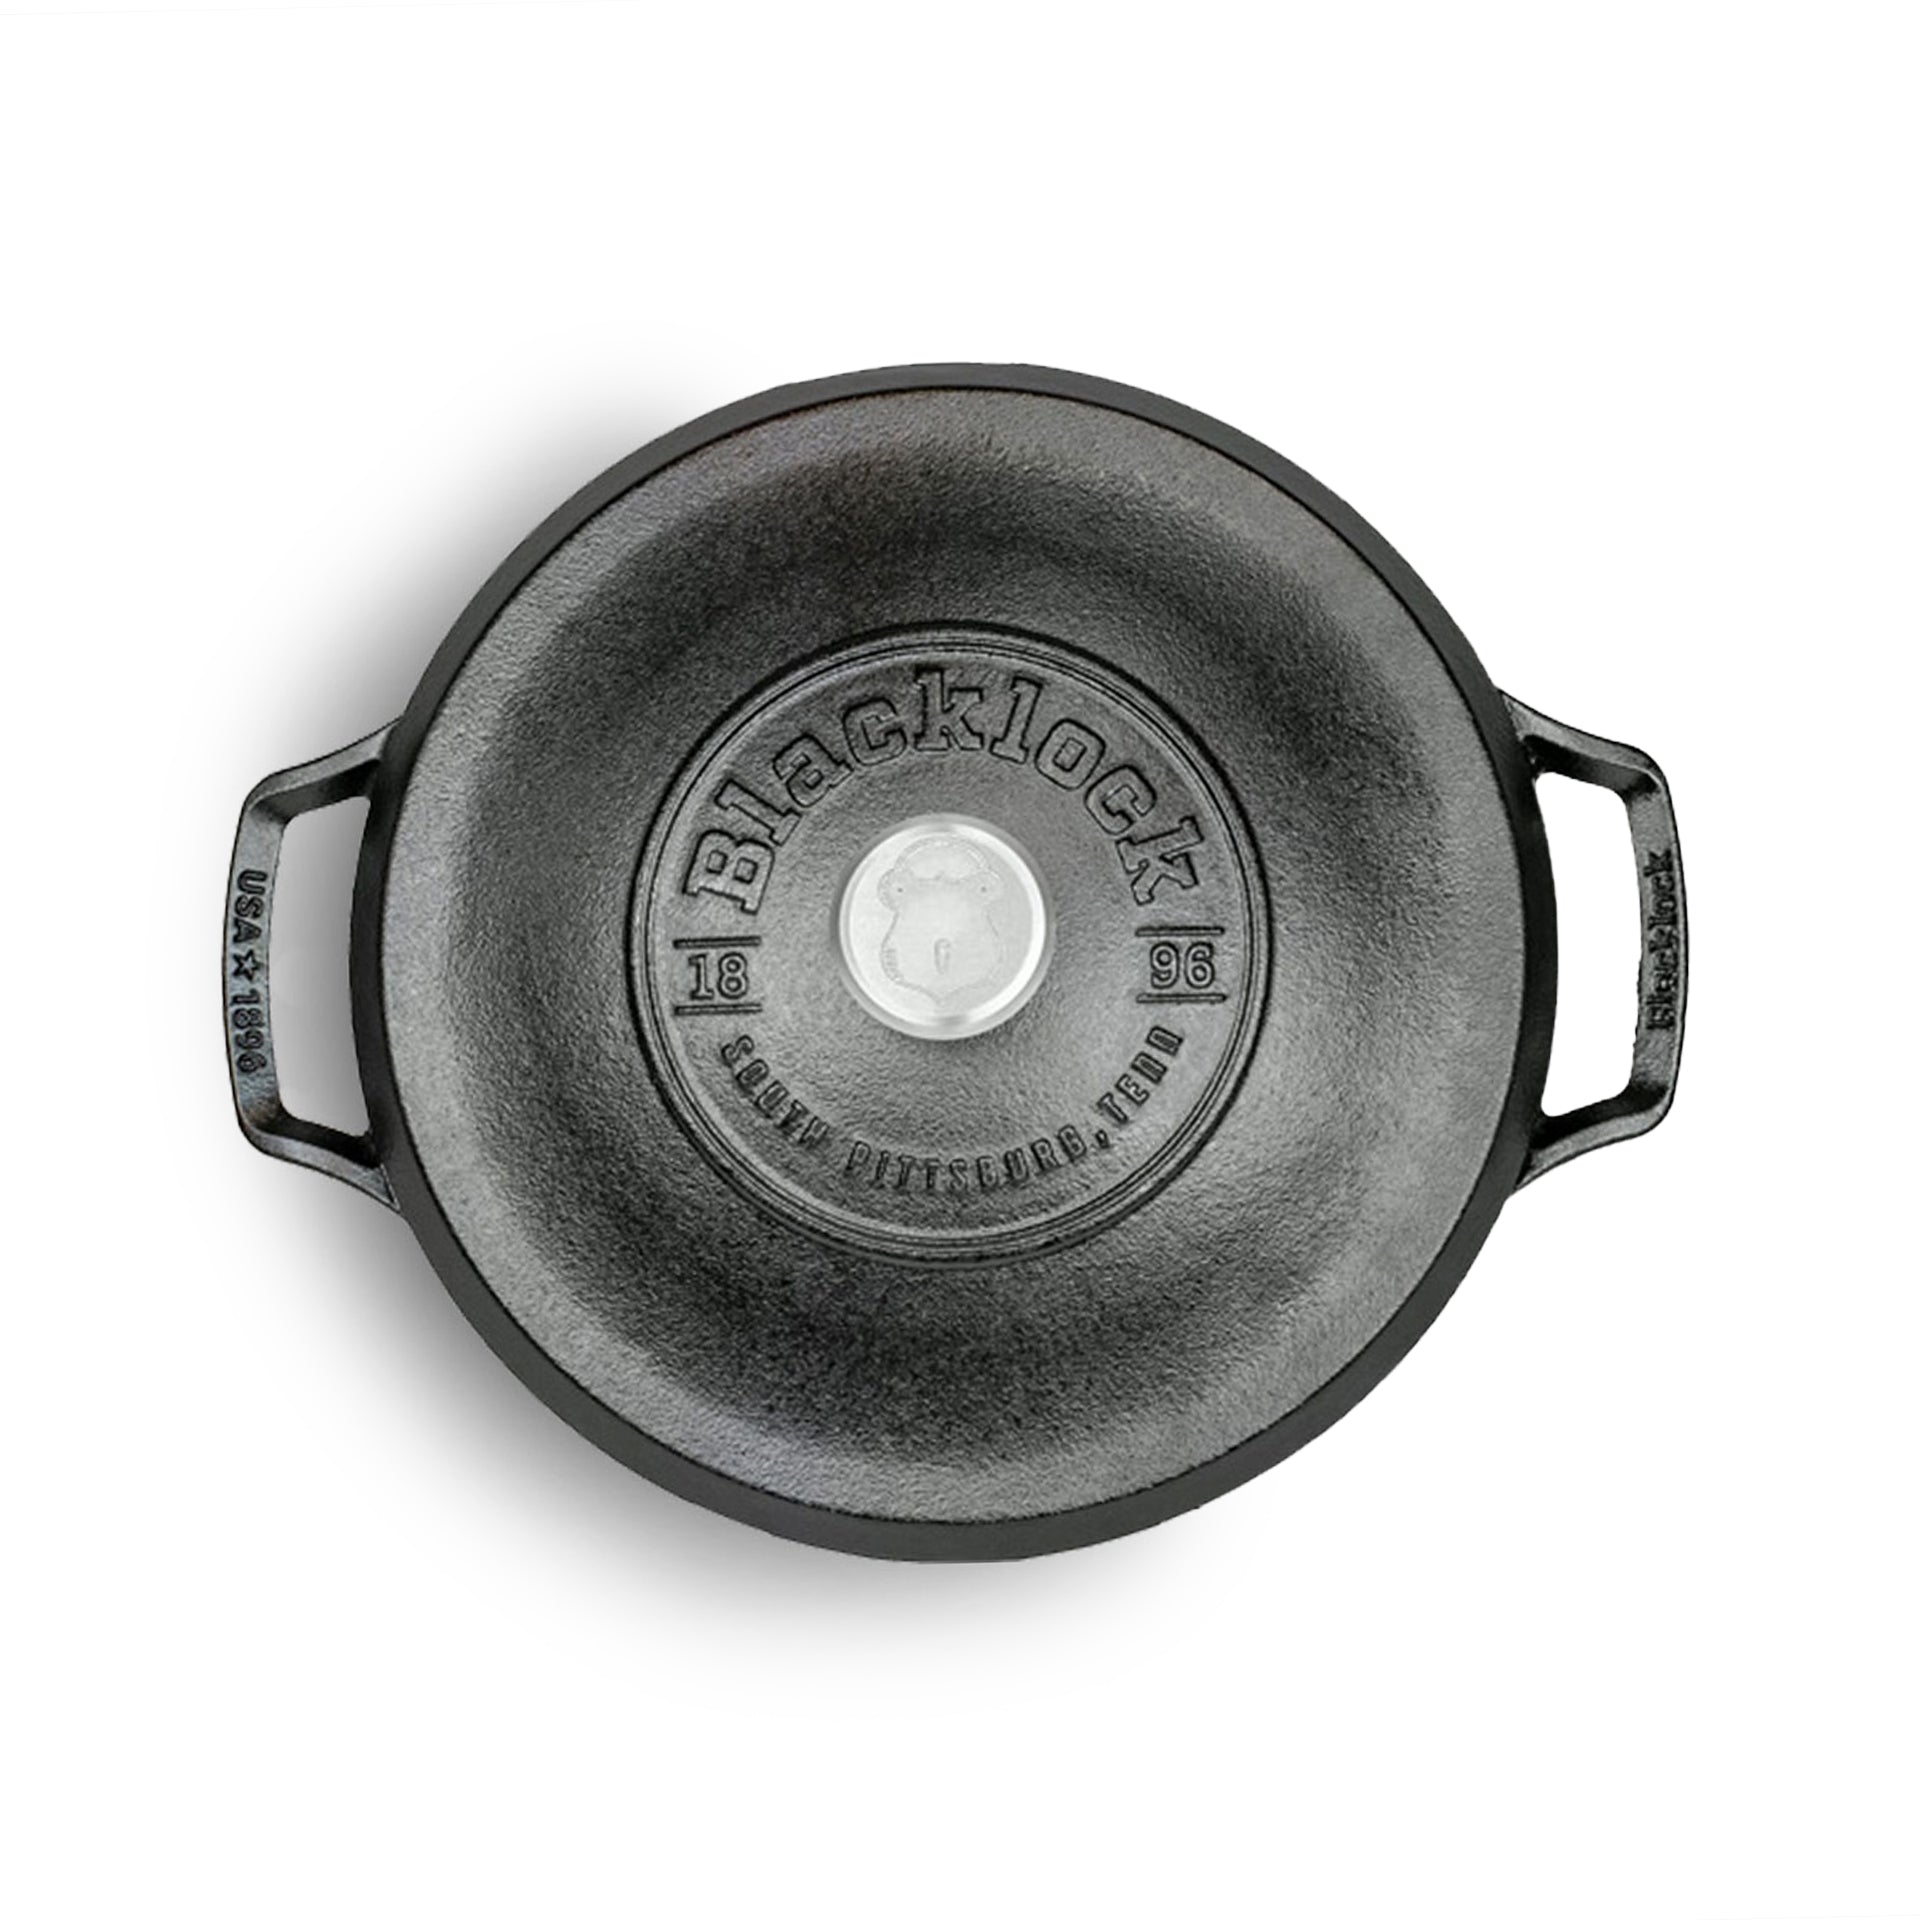 Is Having An Insane Sale On Lodge Cast-Iron Cookware During